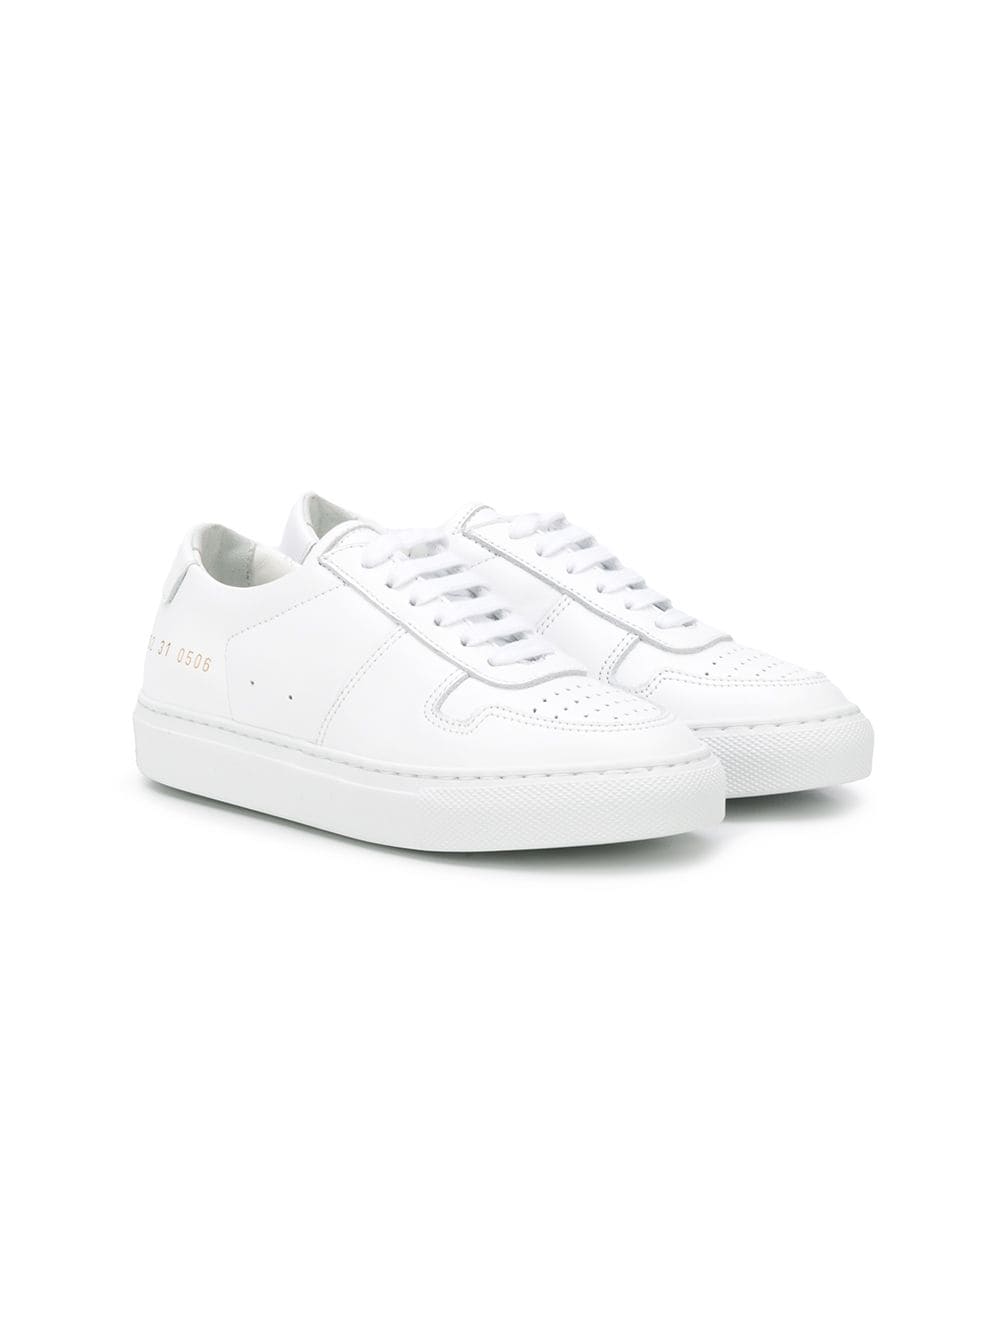 Common Projects Bball low-top Trainers - Farfetch